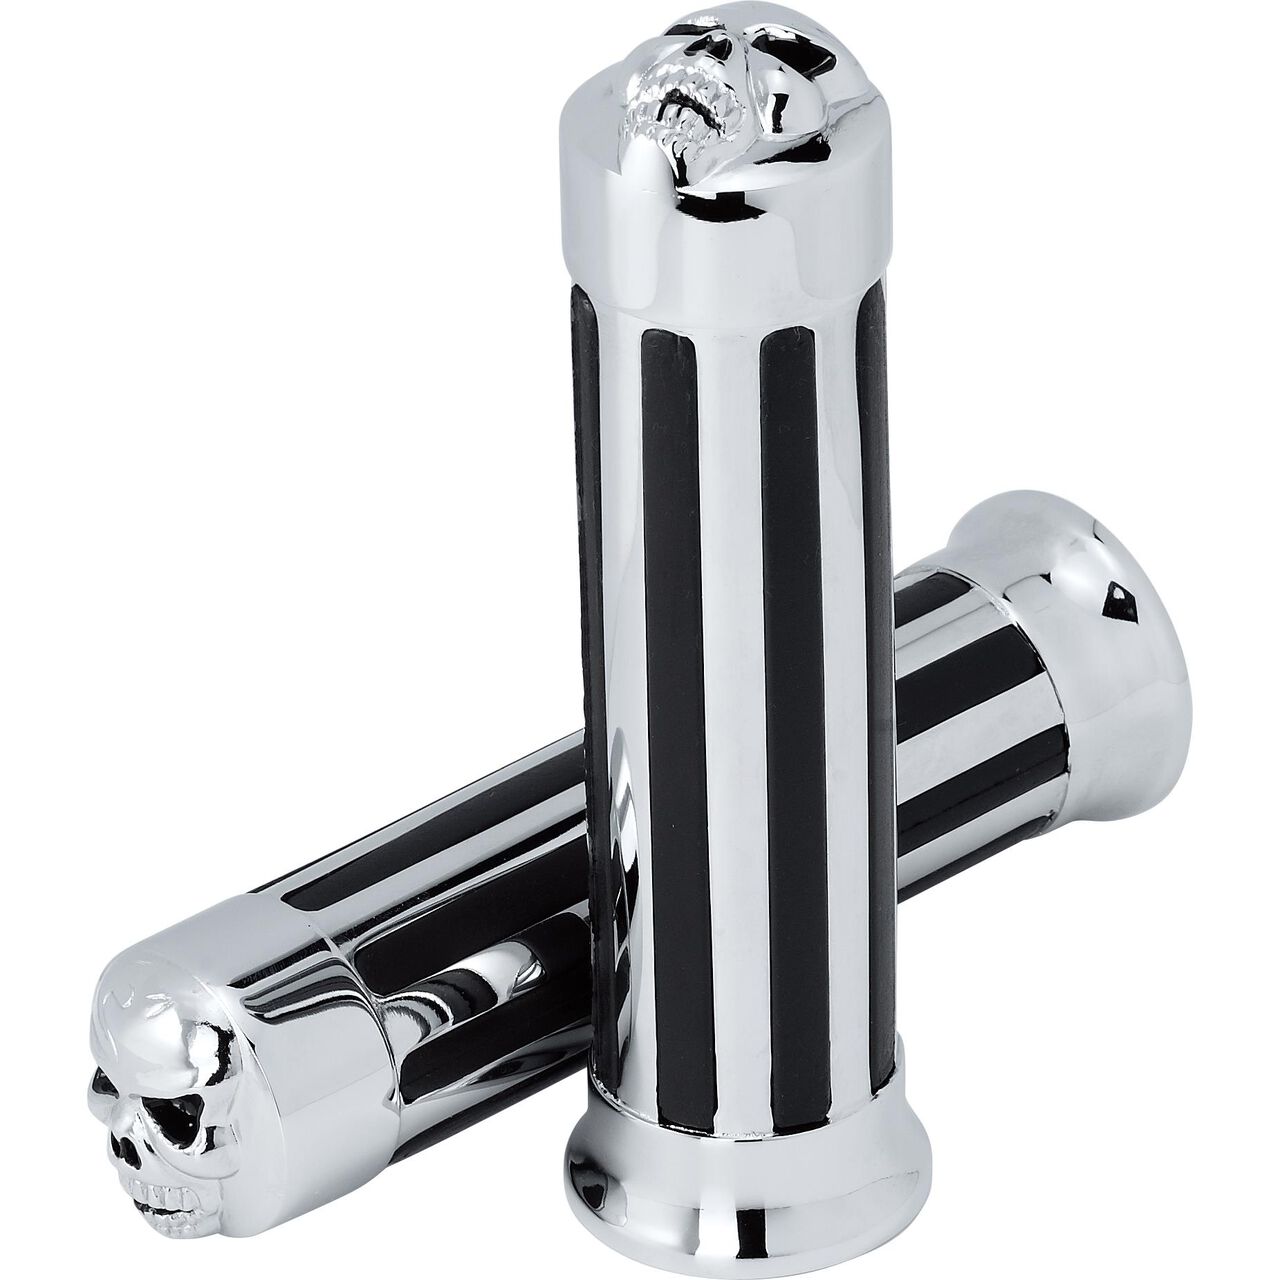 grip pair ST01 with skull for 25,4mm (1") chrome